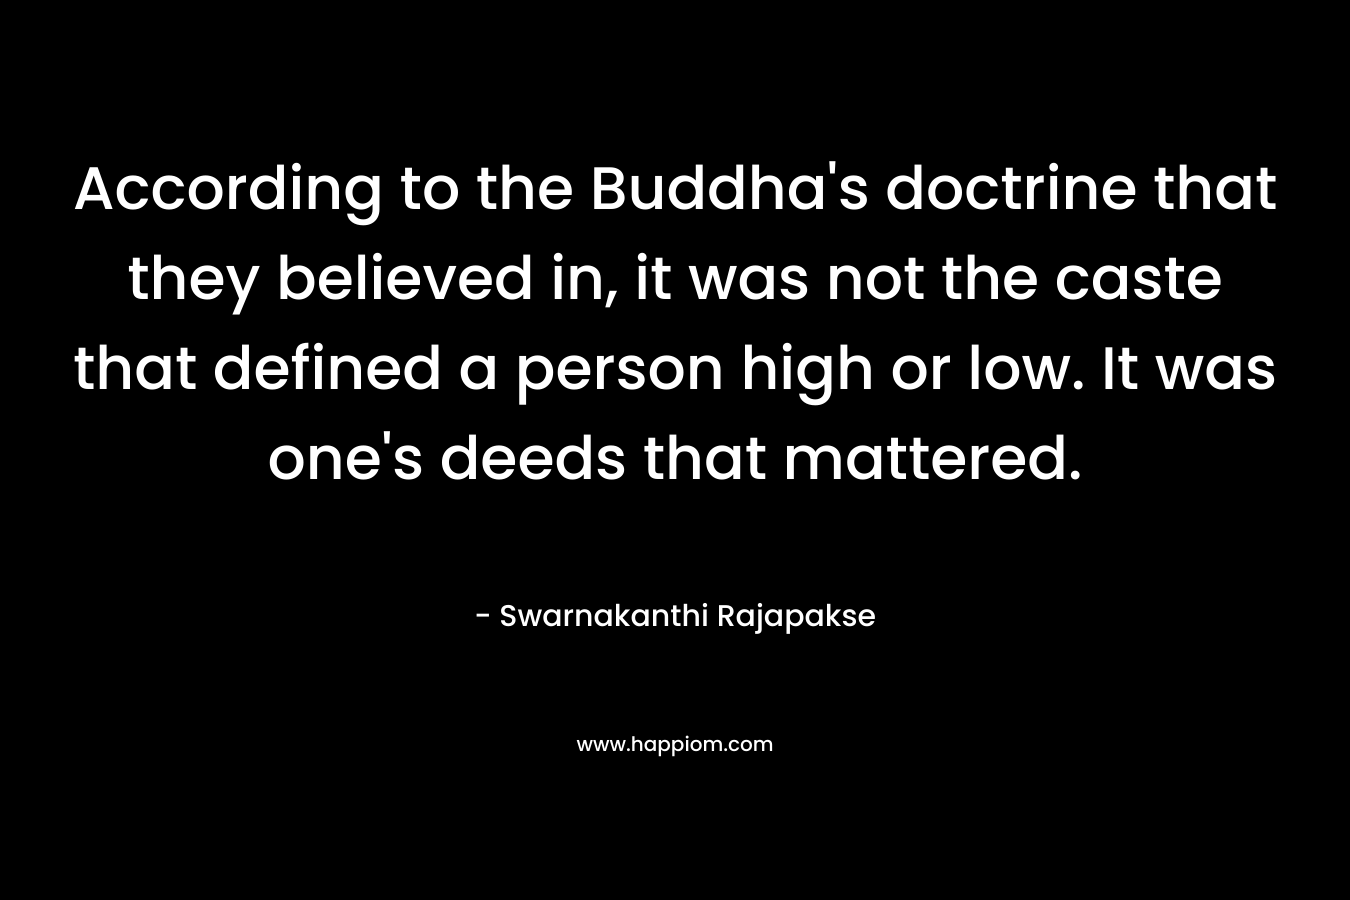 According to the Buddha’s doctrine that they believed in, it was not the caste that defined a person high or low. It was one’s deeds that mattered. – Swarnakanthi Rajapakse